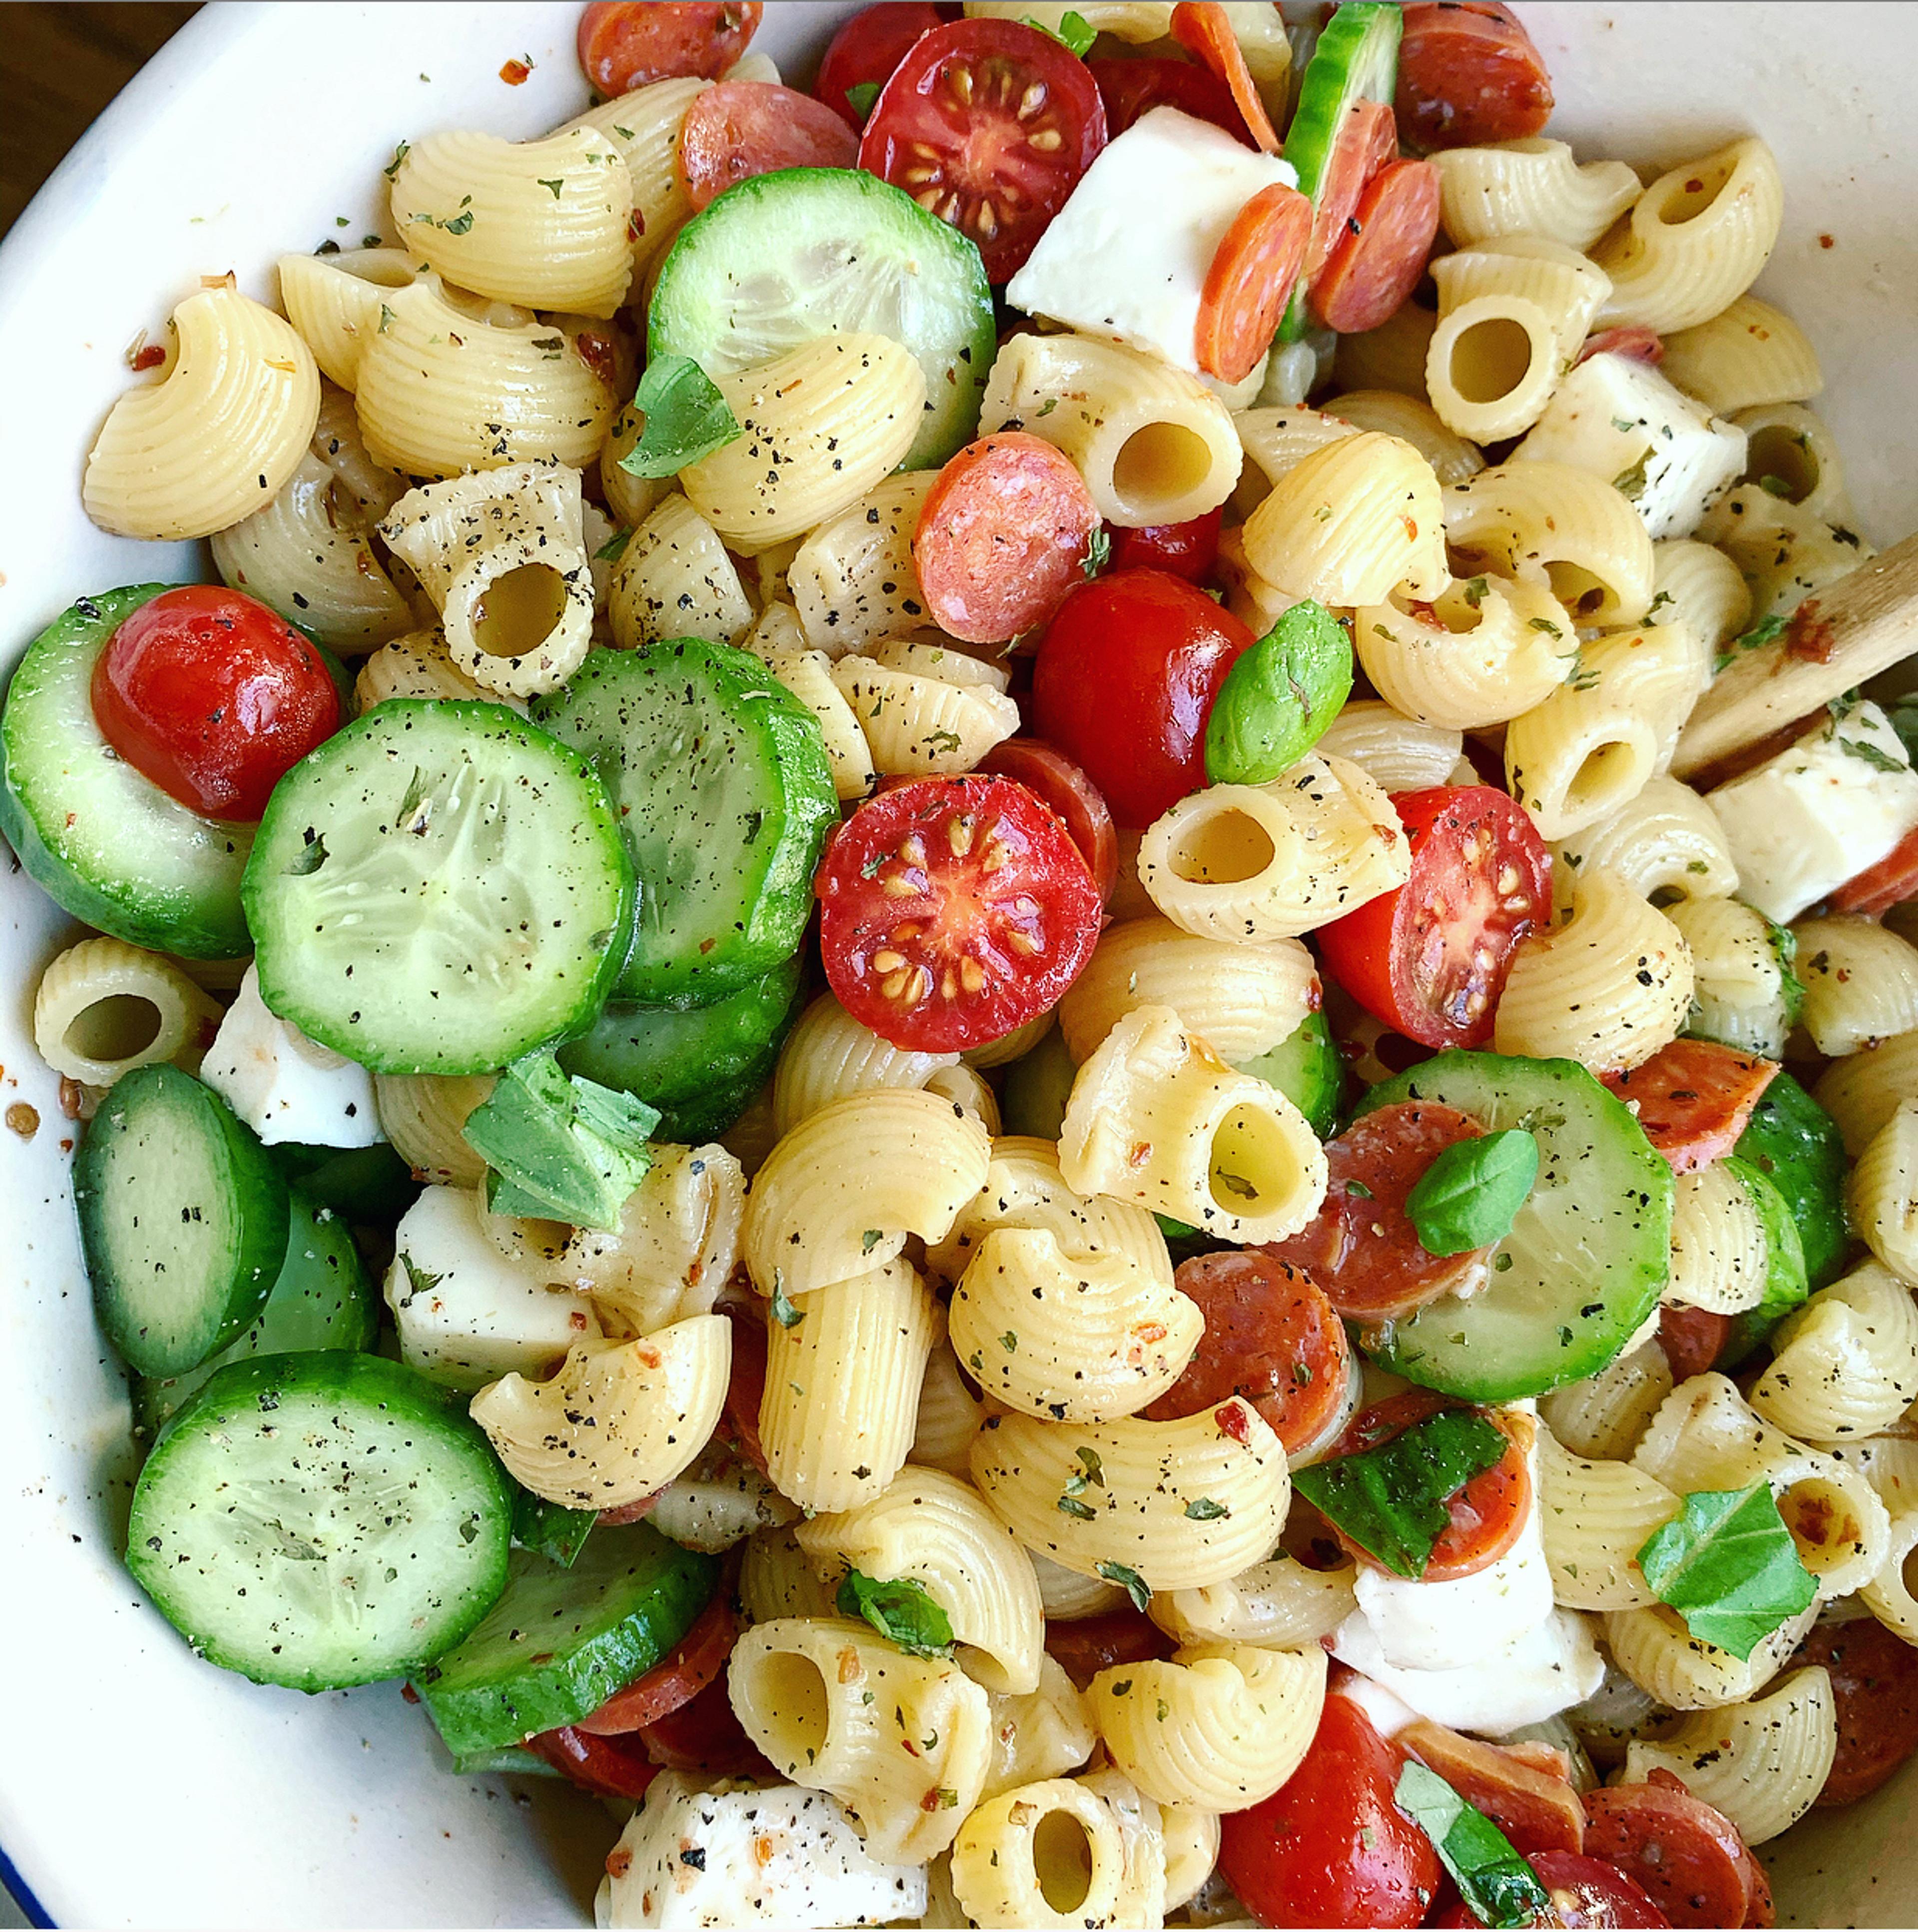 A colorful pasta salad with elbow pasta, cherry tomatoes, sliced cucumbers, mini pepperonis, and cubed cheese sprinkled with pepper.